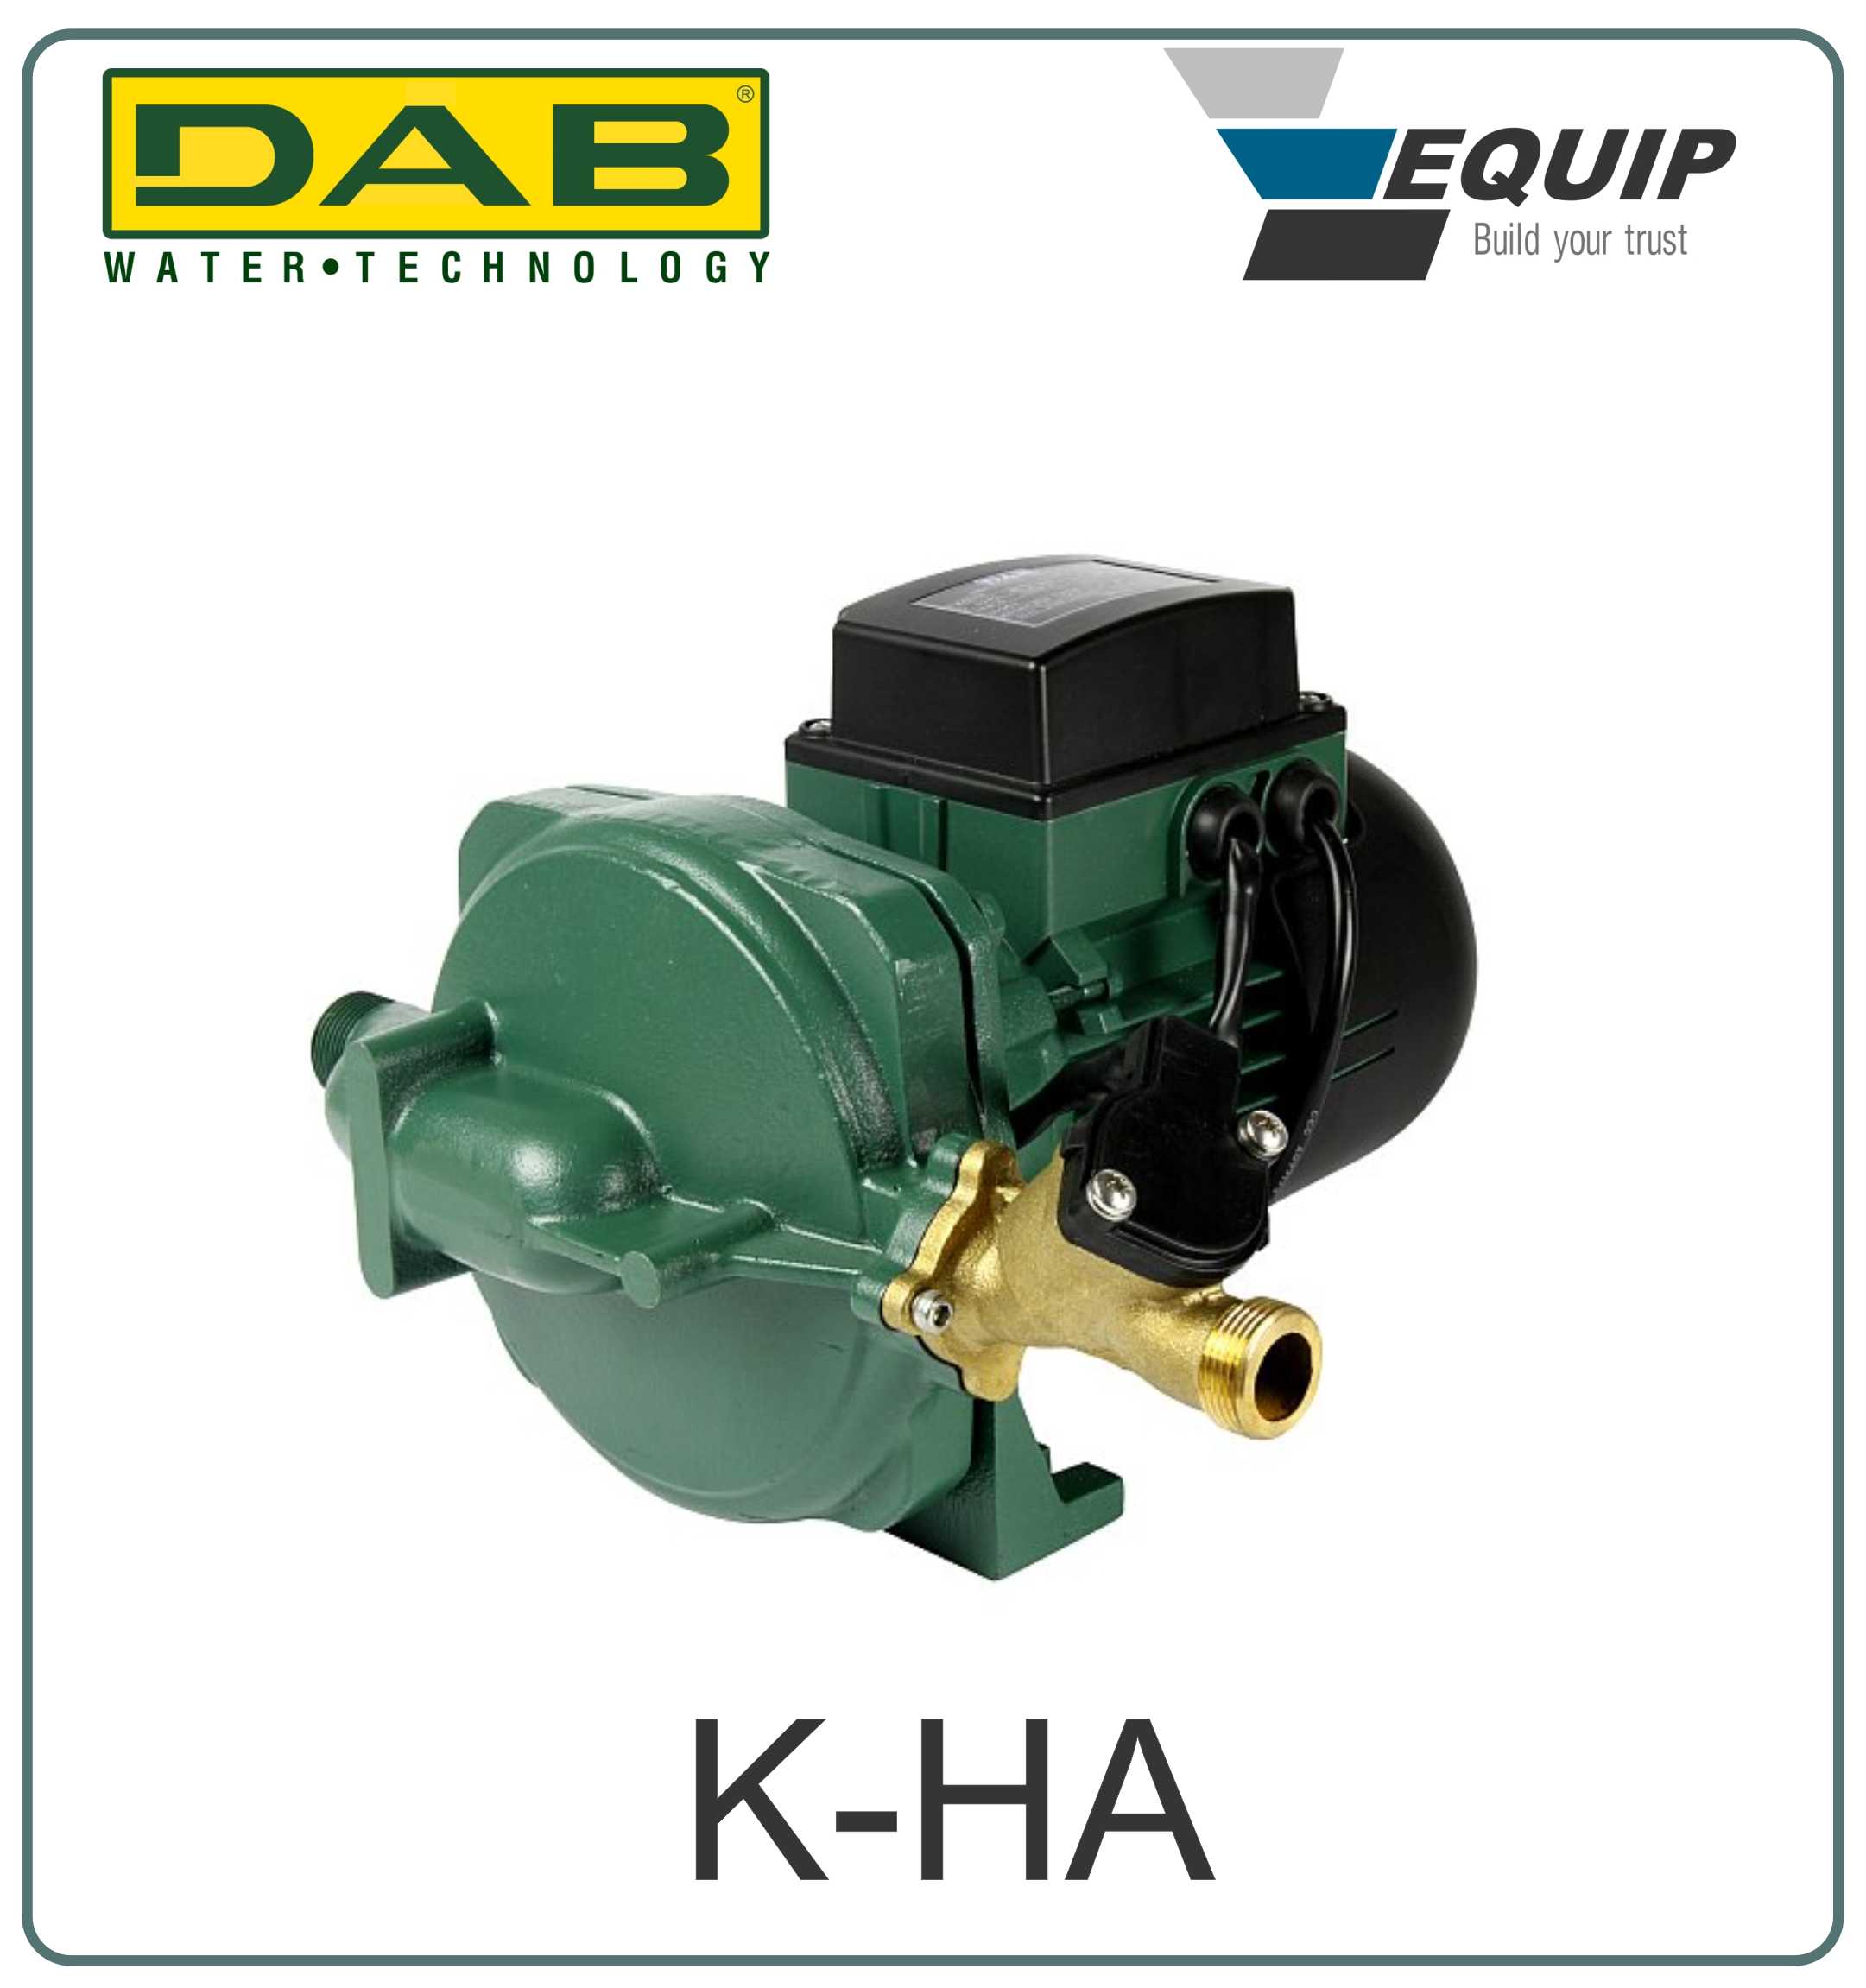 Hot water booster pumps